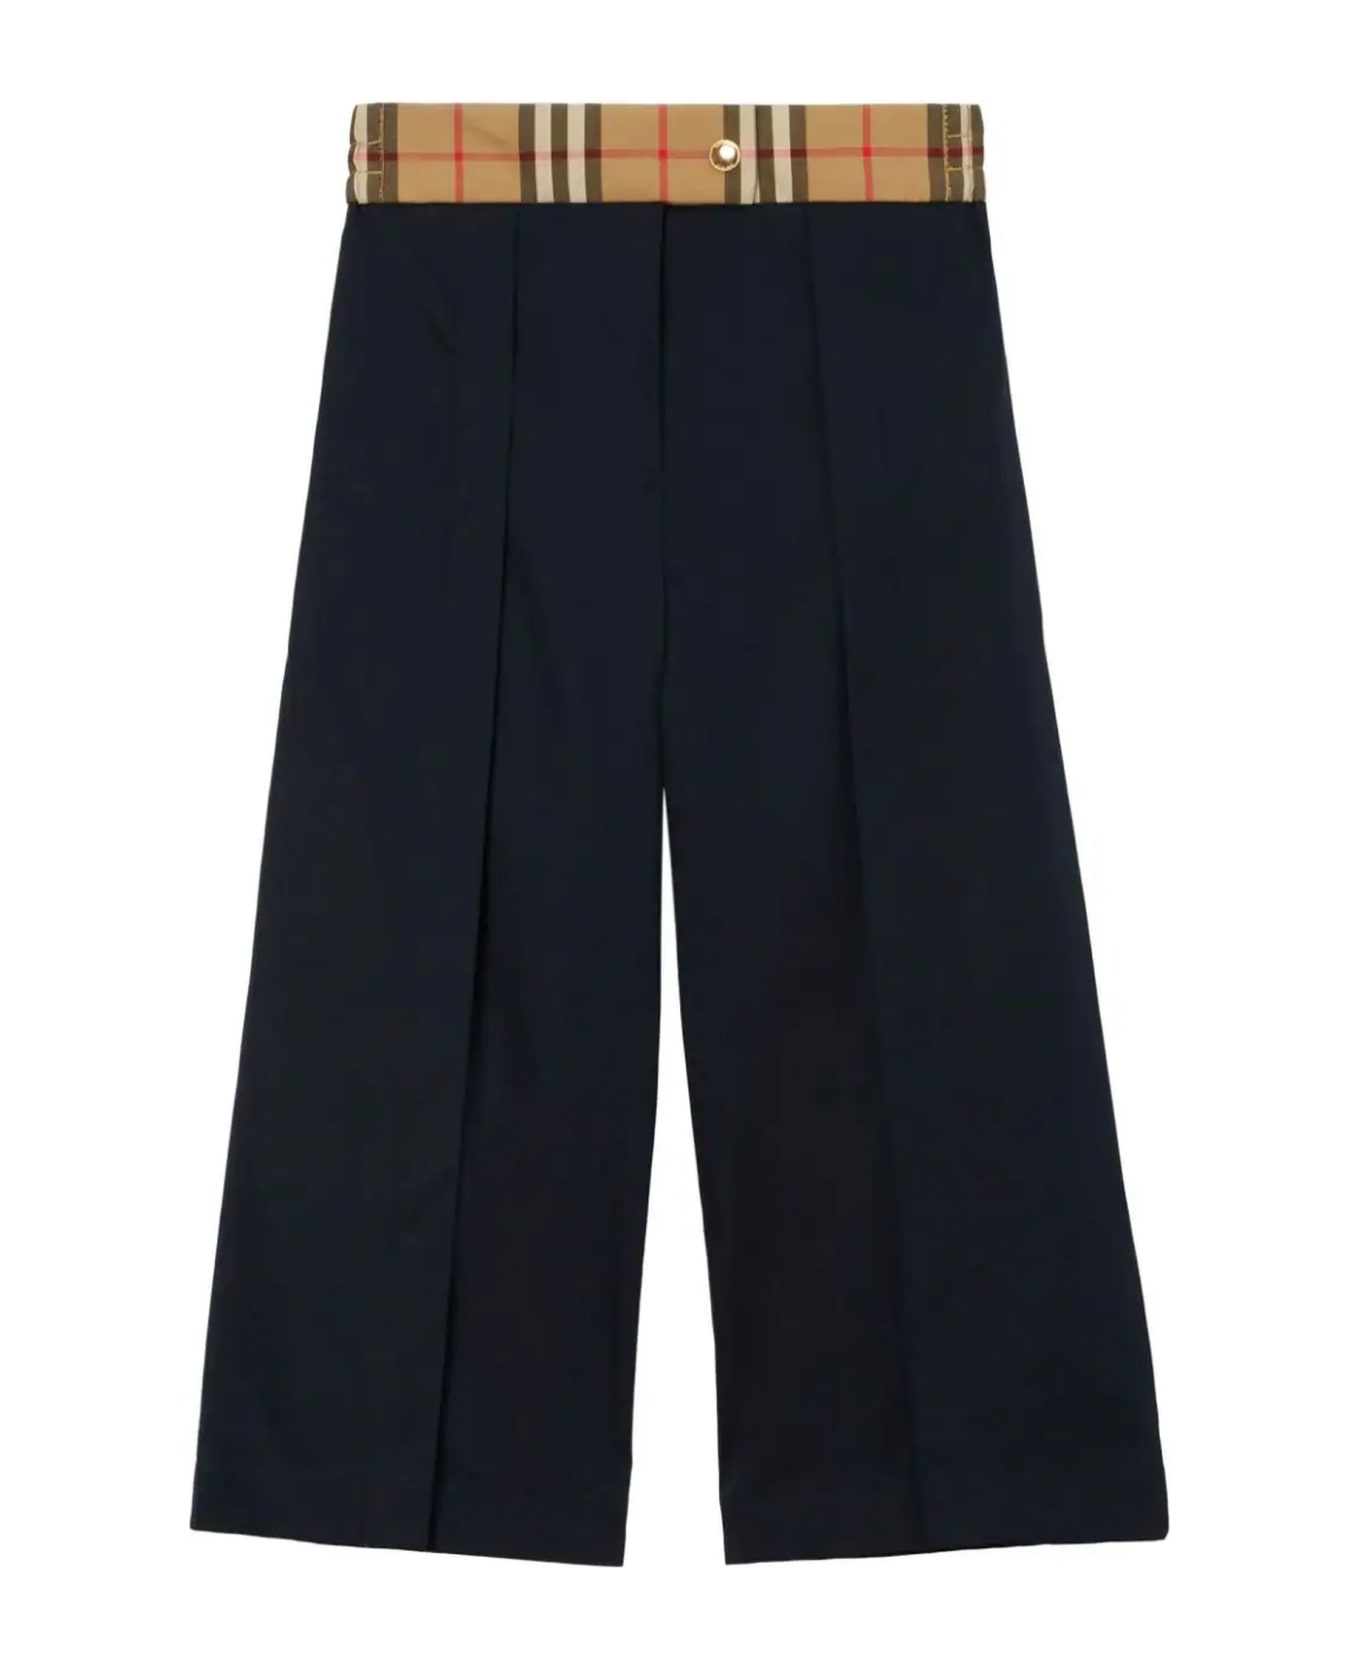 Burberry Navy Blue Cotton Trousers - Navy black